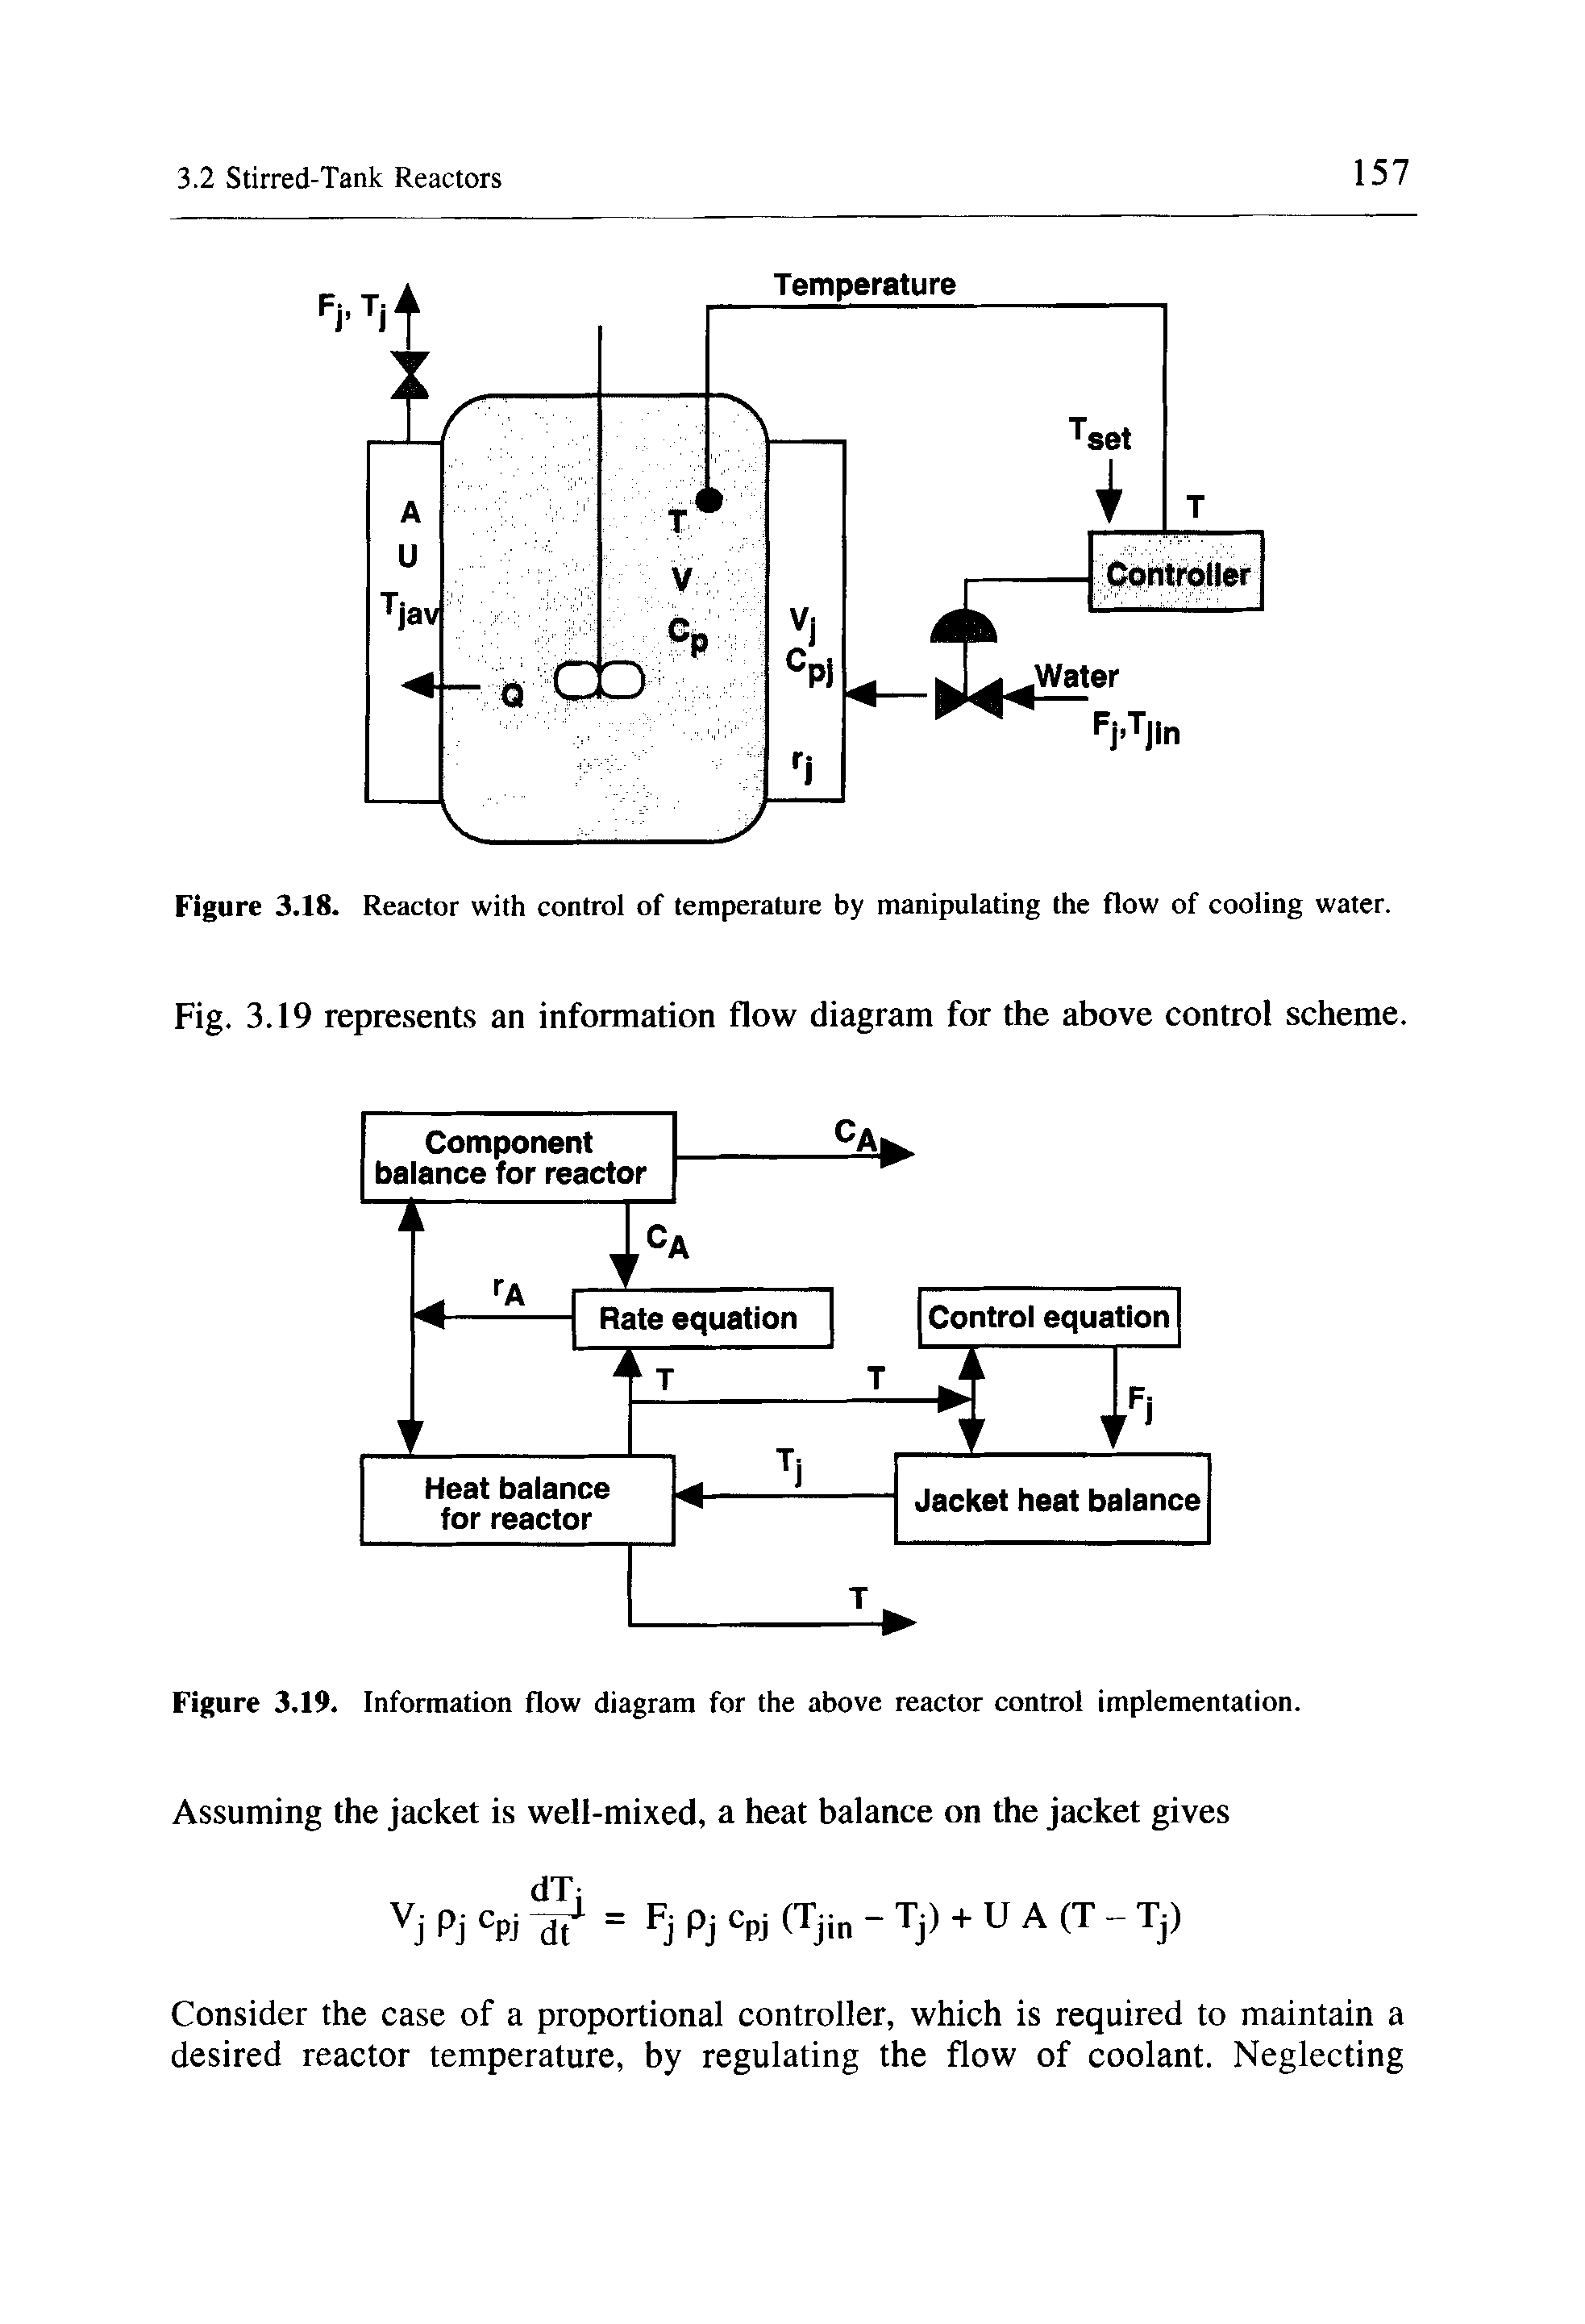 Figure 3.19. Information flow diagram for the above reactor control implementation.